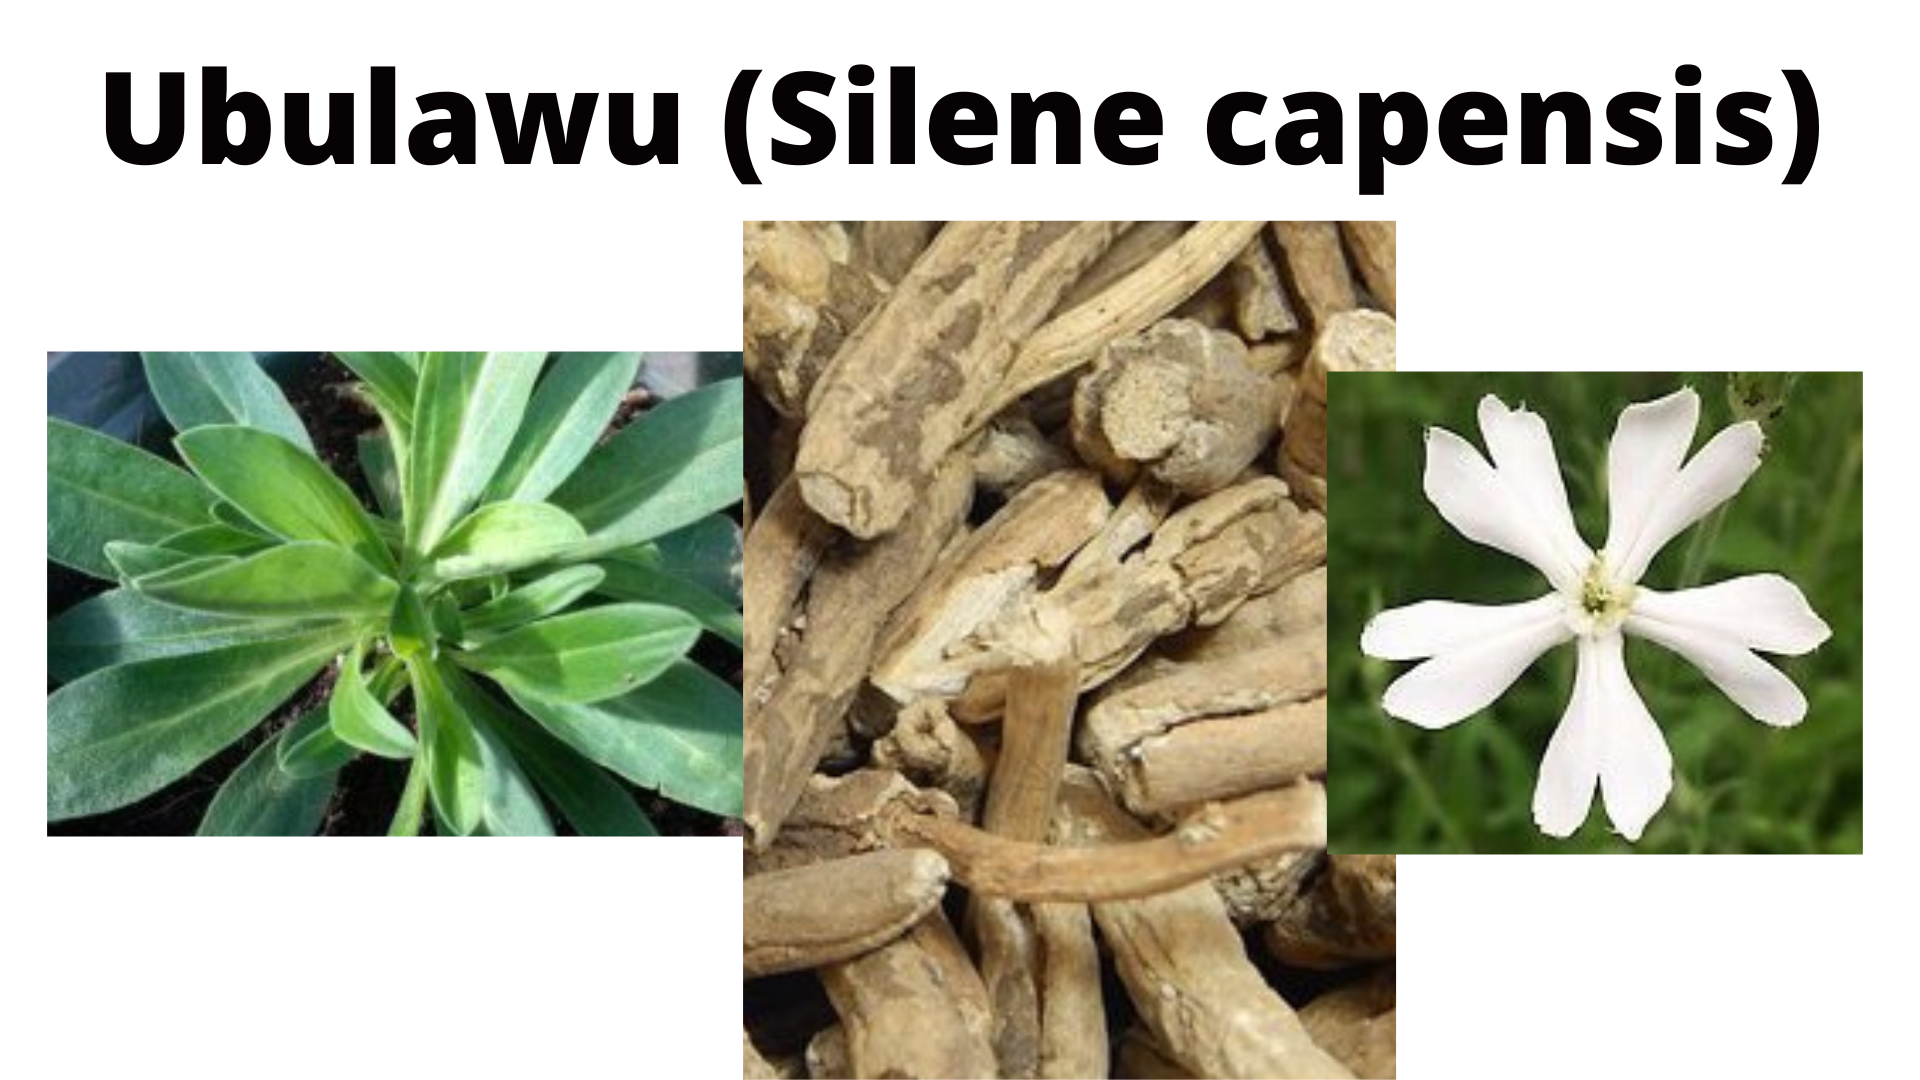 You are currently viewing Silene capensis (Ubulawu)